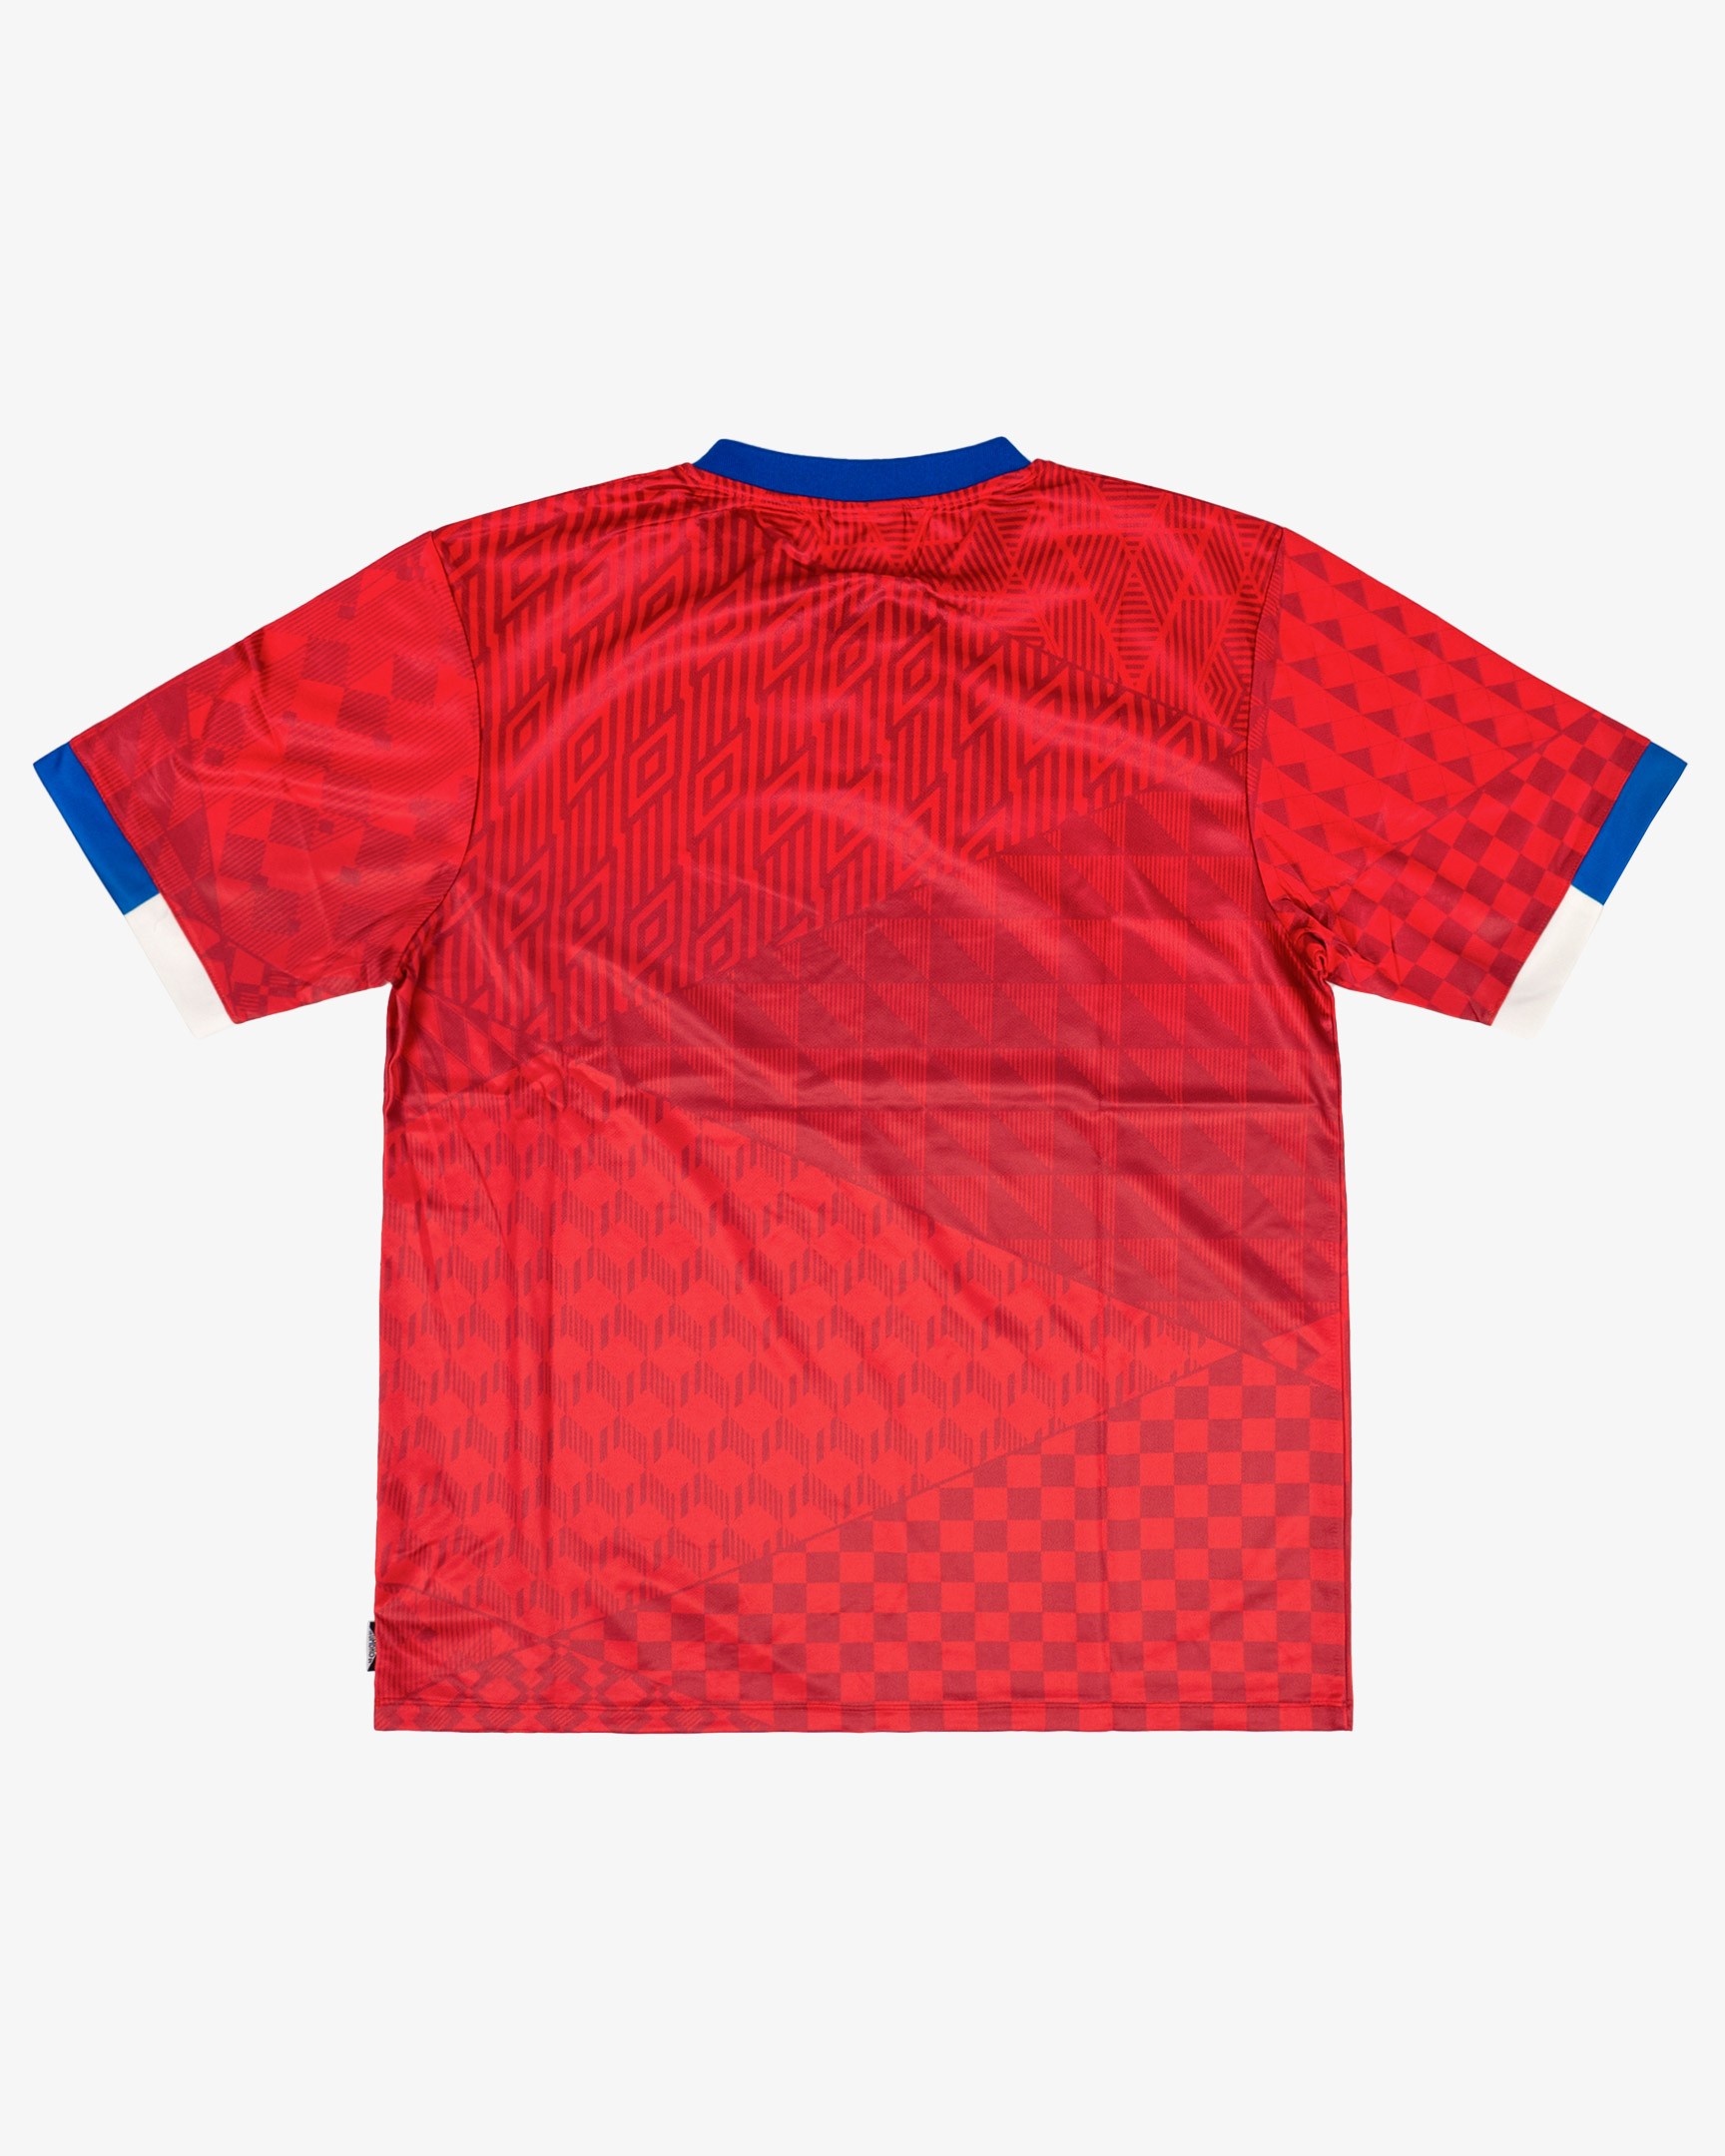 CHILE ICONIC GRAPHIC JERSEY